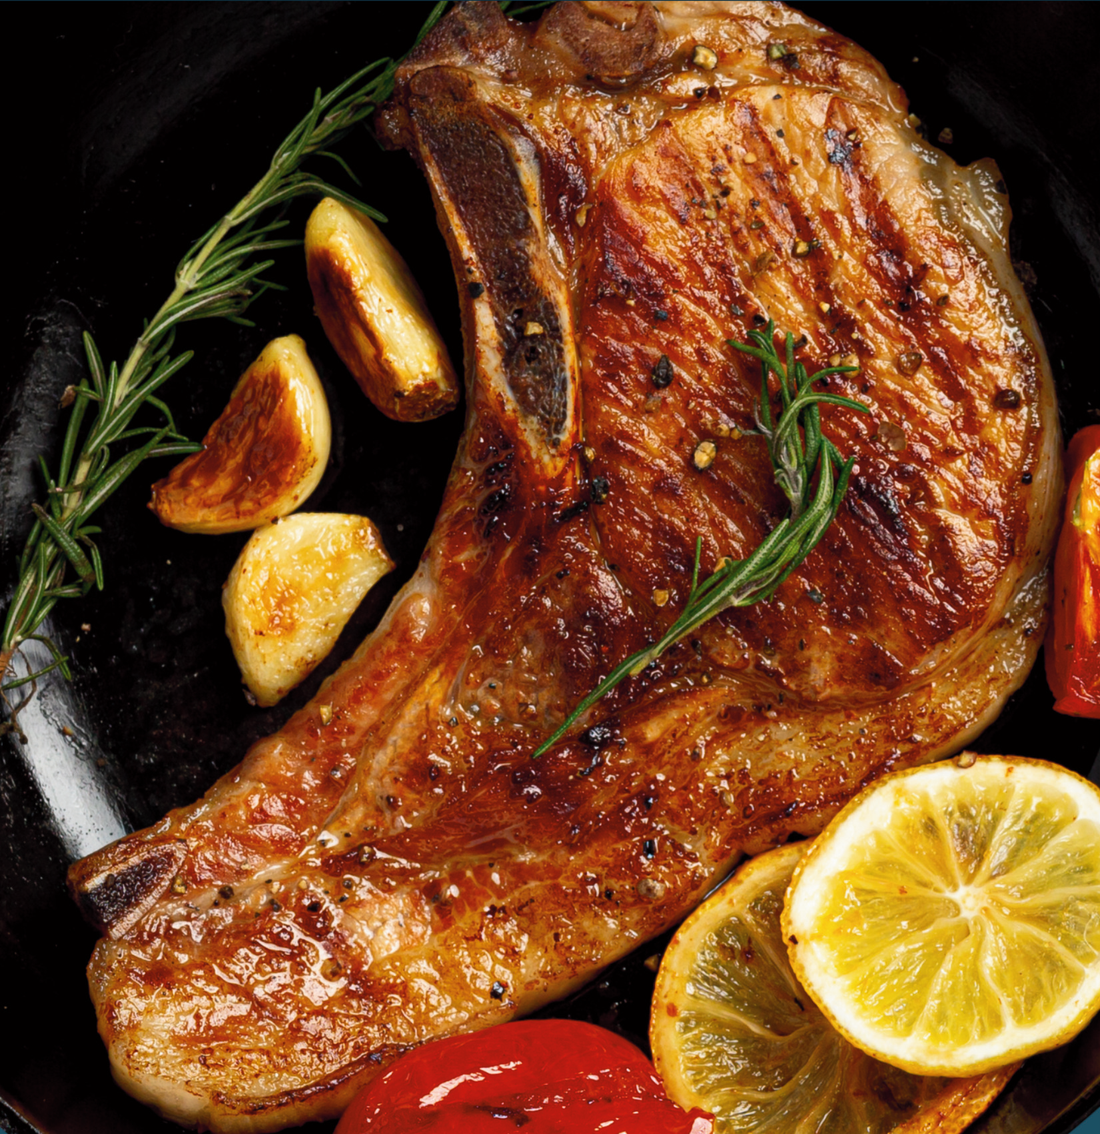 A golden-brown, cooked bone-in pork chop in a pan with a garnish of garlic, herbs, and lemon slices.